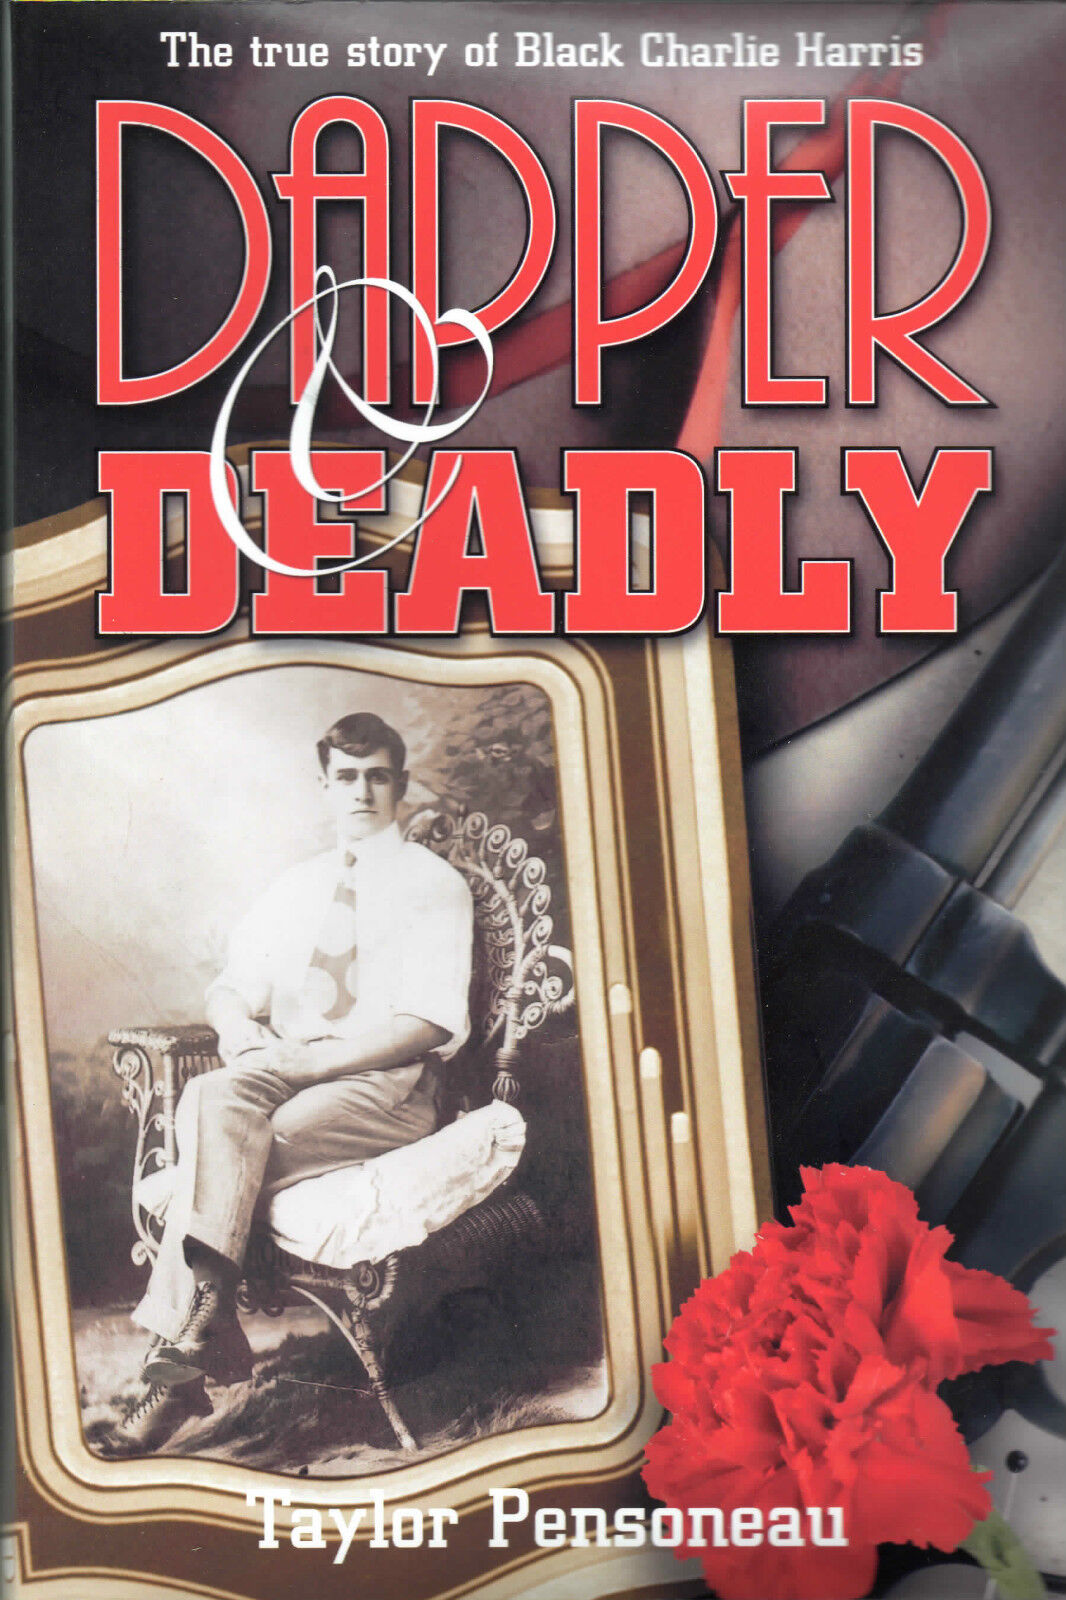 NEW SIGNED CRIME BOOK Dapper & Deadly: The True Story of Black Charlie Harris